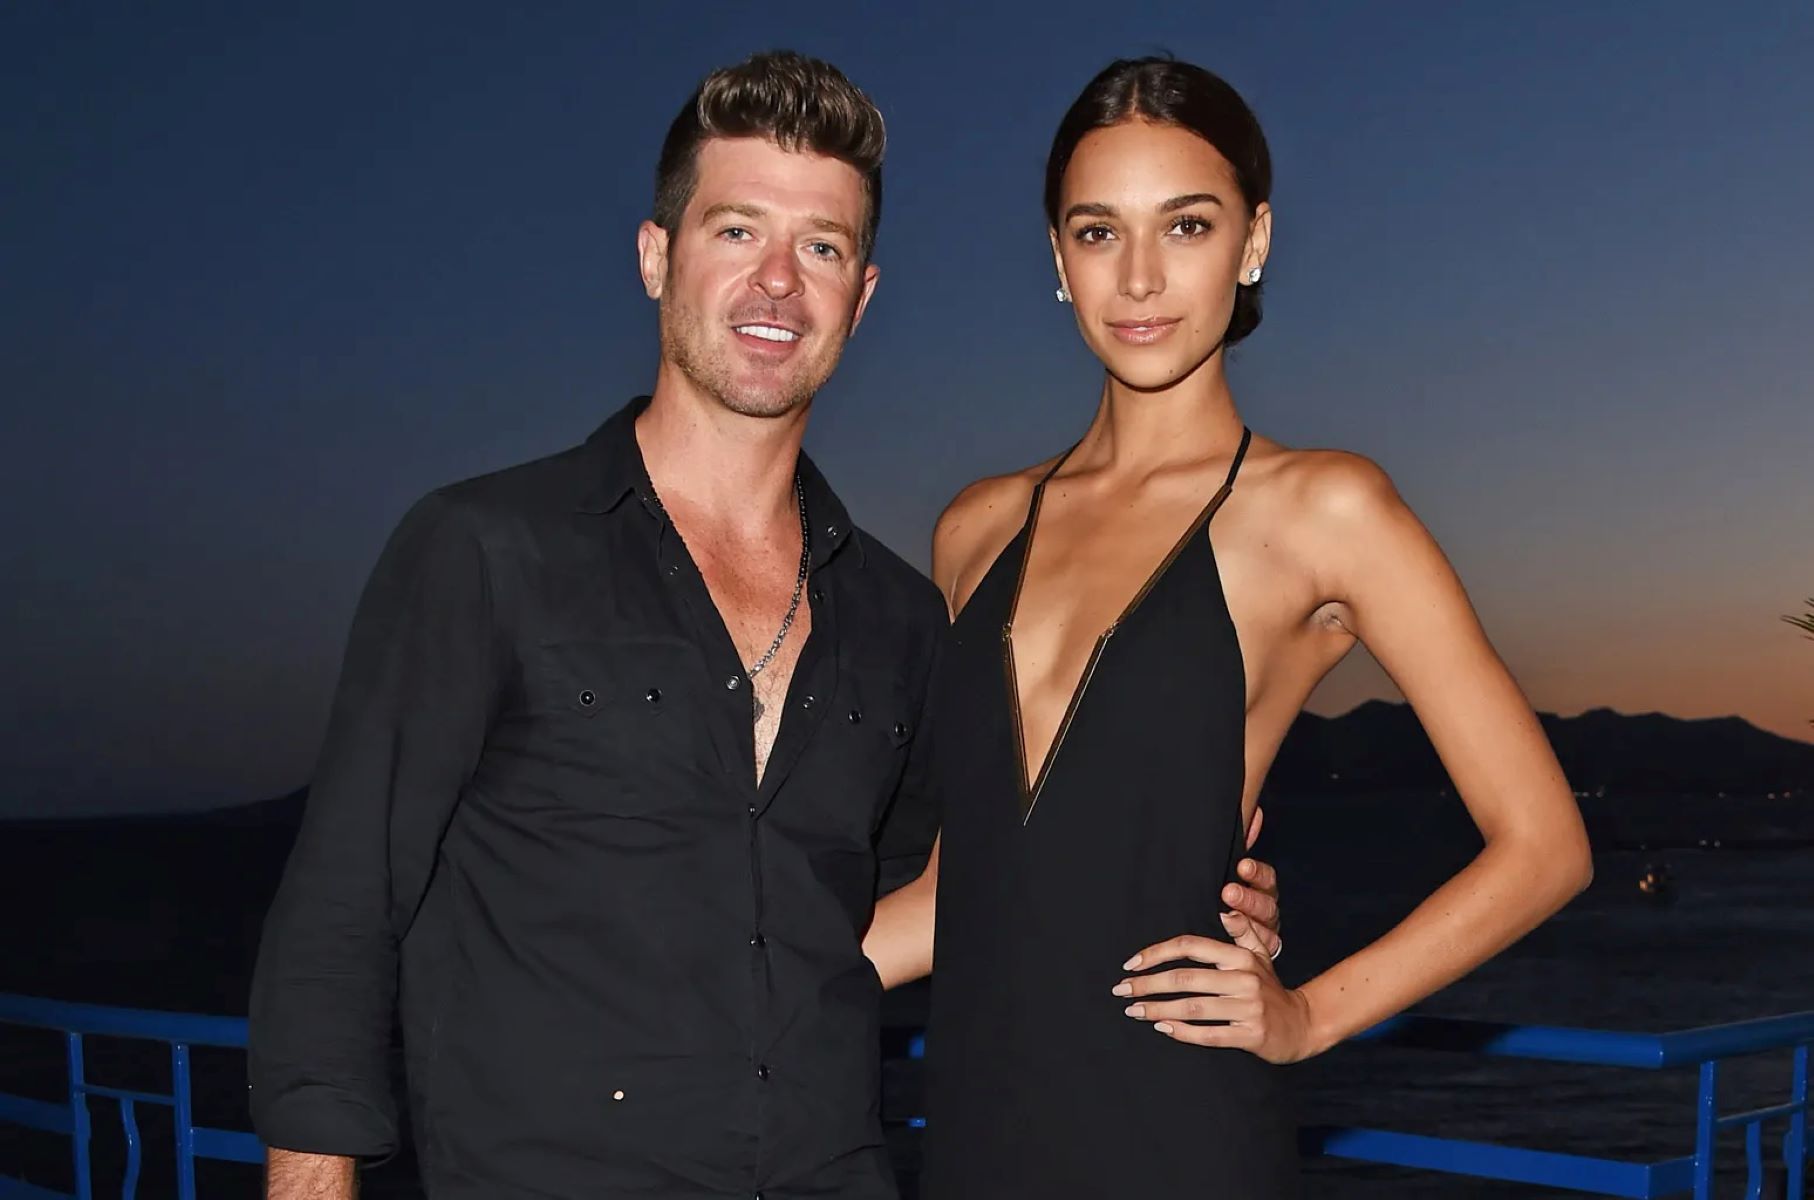 rb-singer-robin-thickes-drunken-night-out-fiancee-struggles-to-get-him-in-car